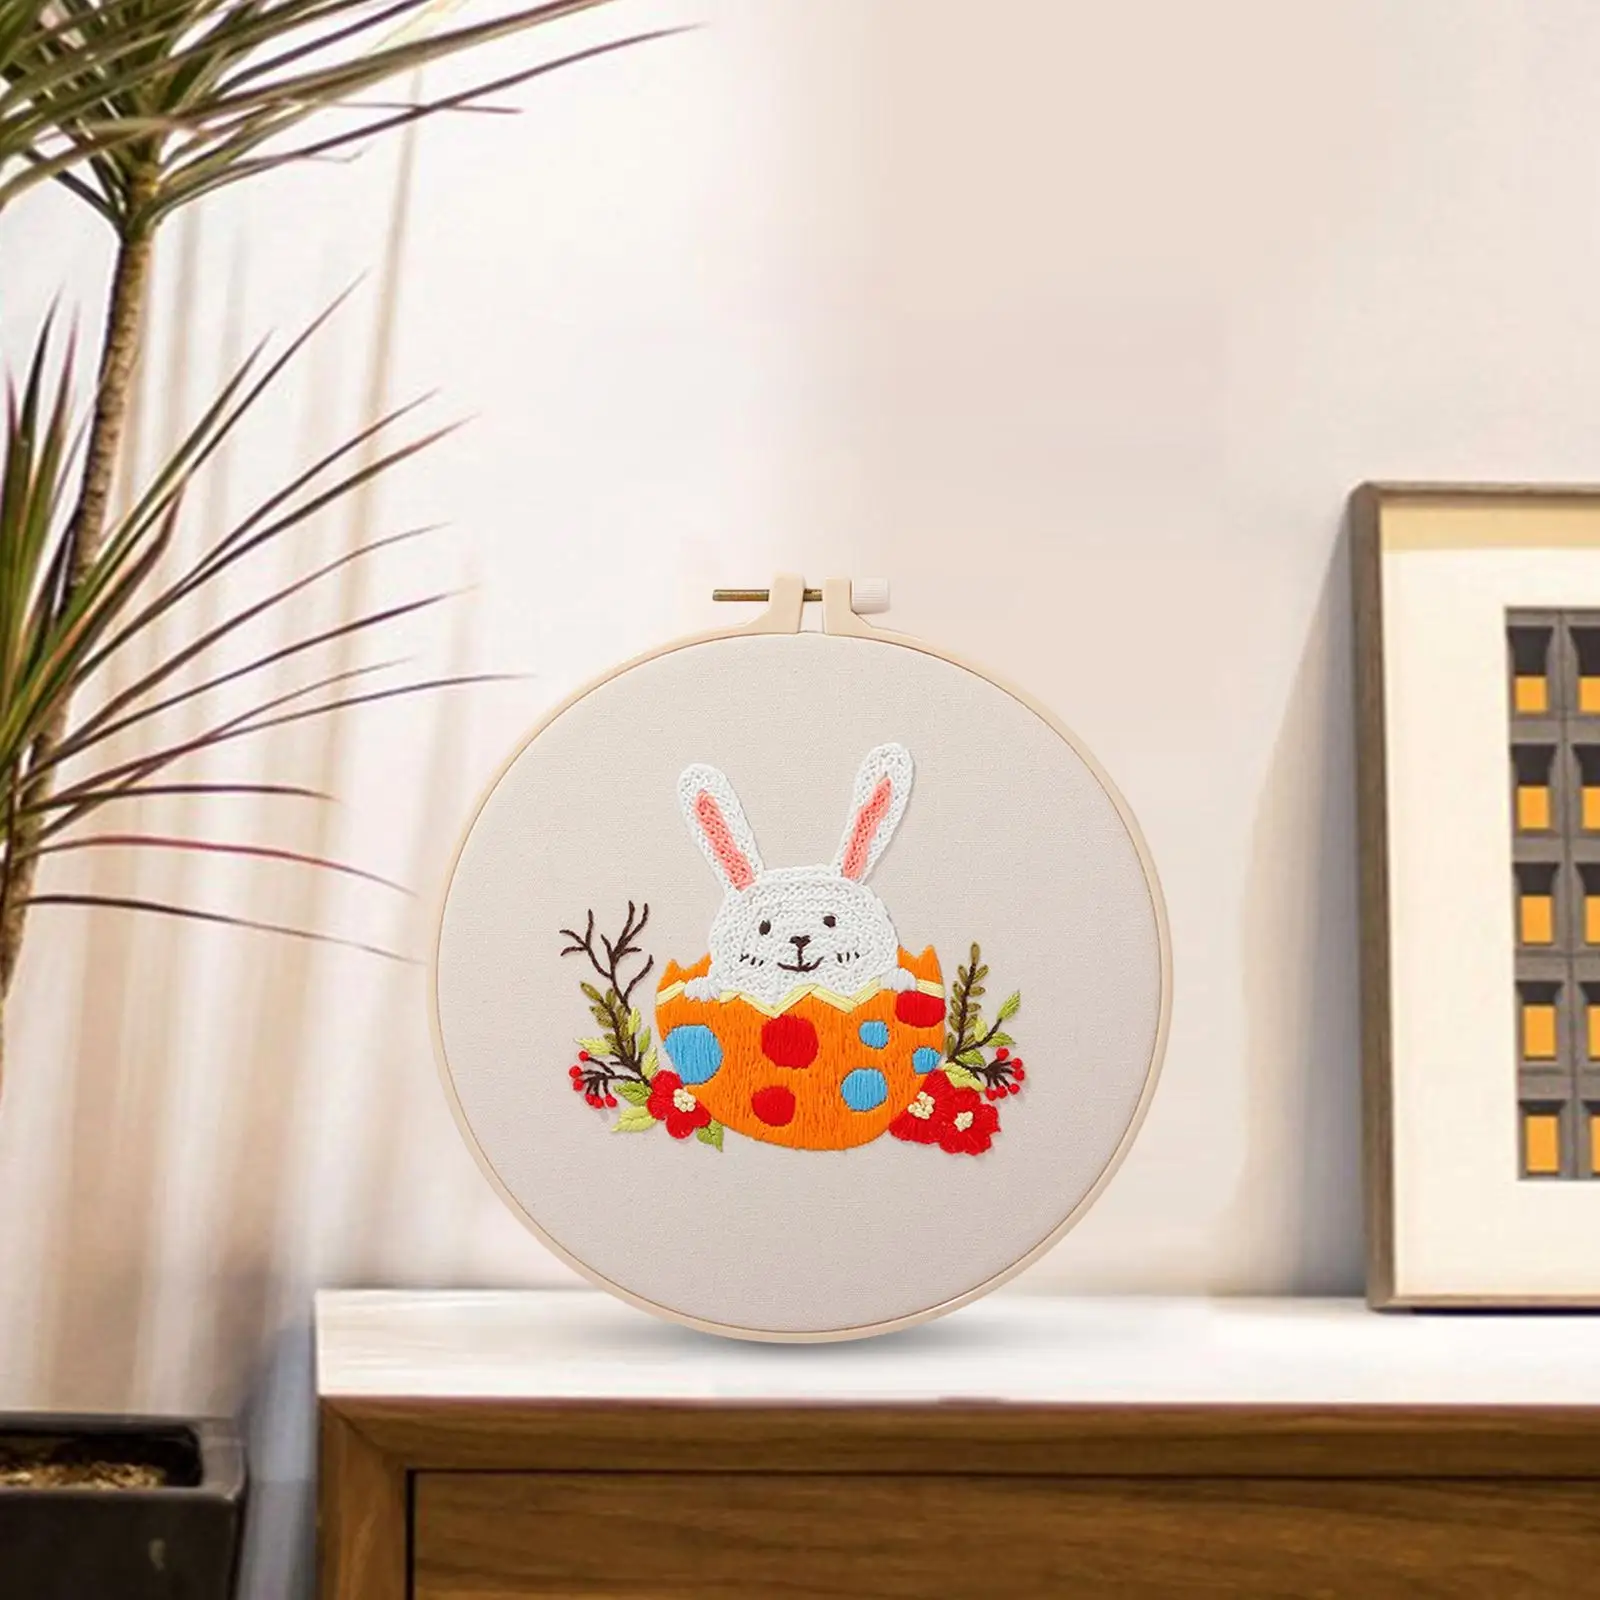 Rabbit Pattern Embroidery Starter Kit Embroidery Hoop Handmade for Beginners DIY Cross Stitch Home Decoration Supplies Gift